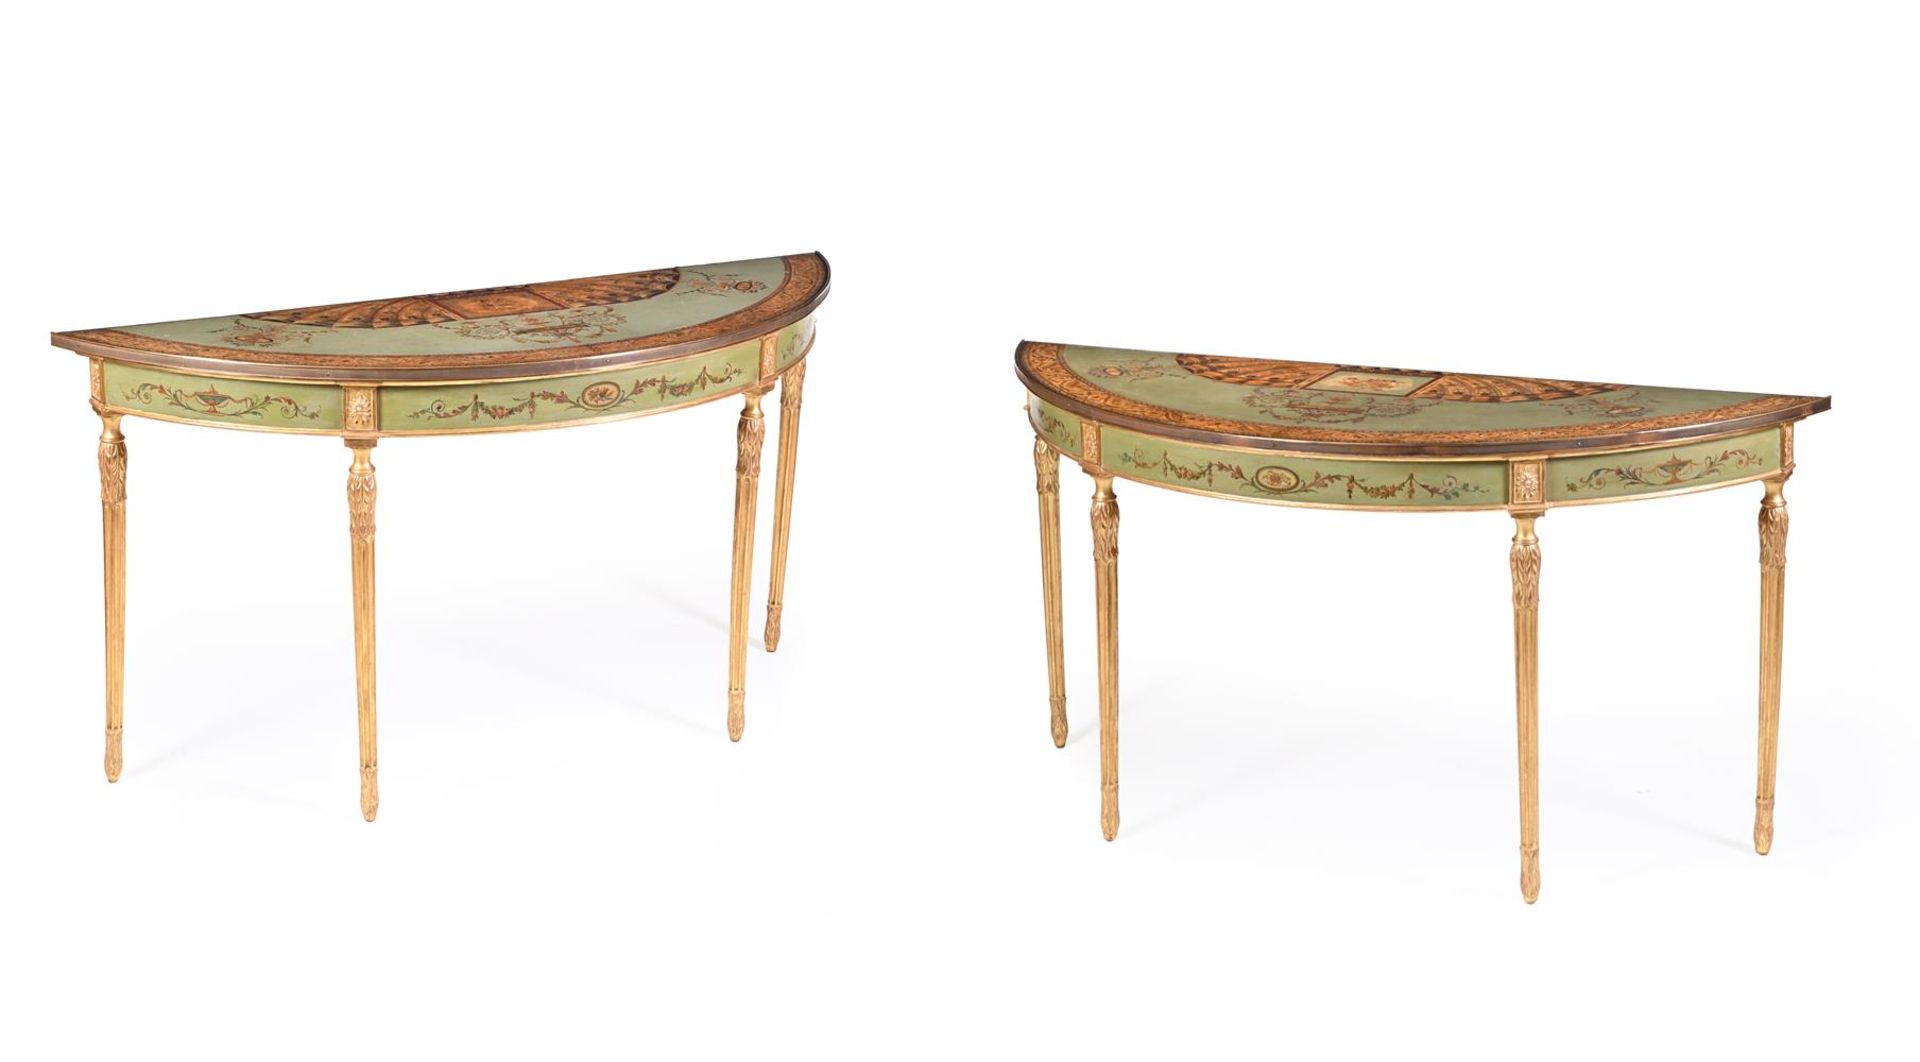 A PAIR OF PARCEL GILT AND POLYCHROME PAINTED SEMI-ELLIPTICAL SIDE TABLES IN GEORGE III STYLE